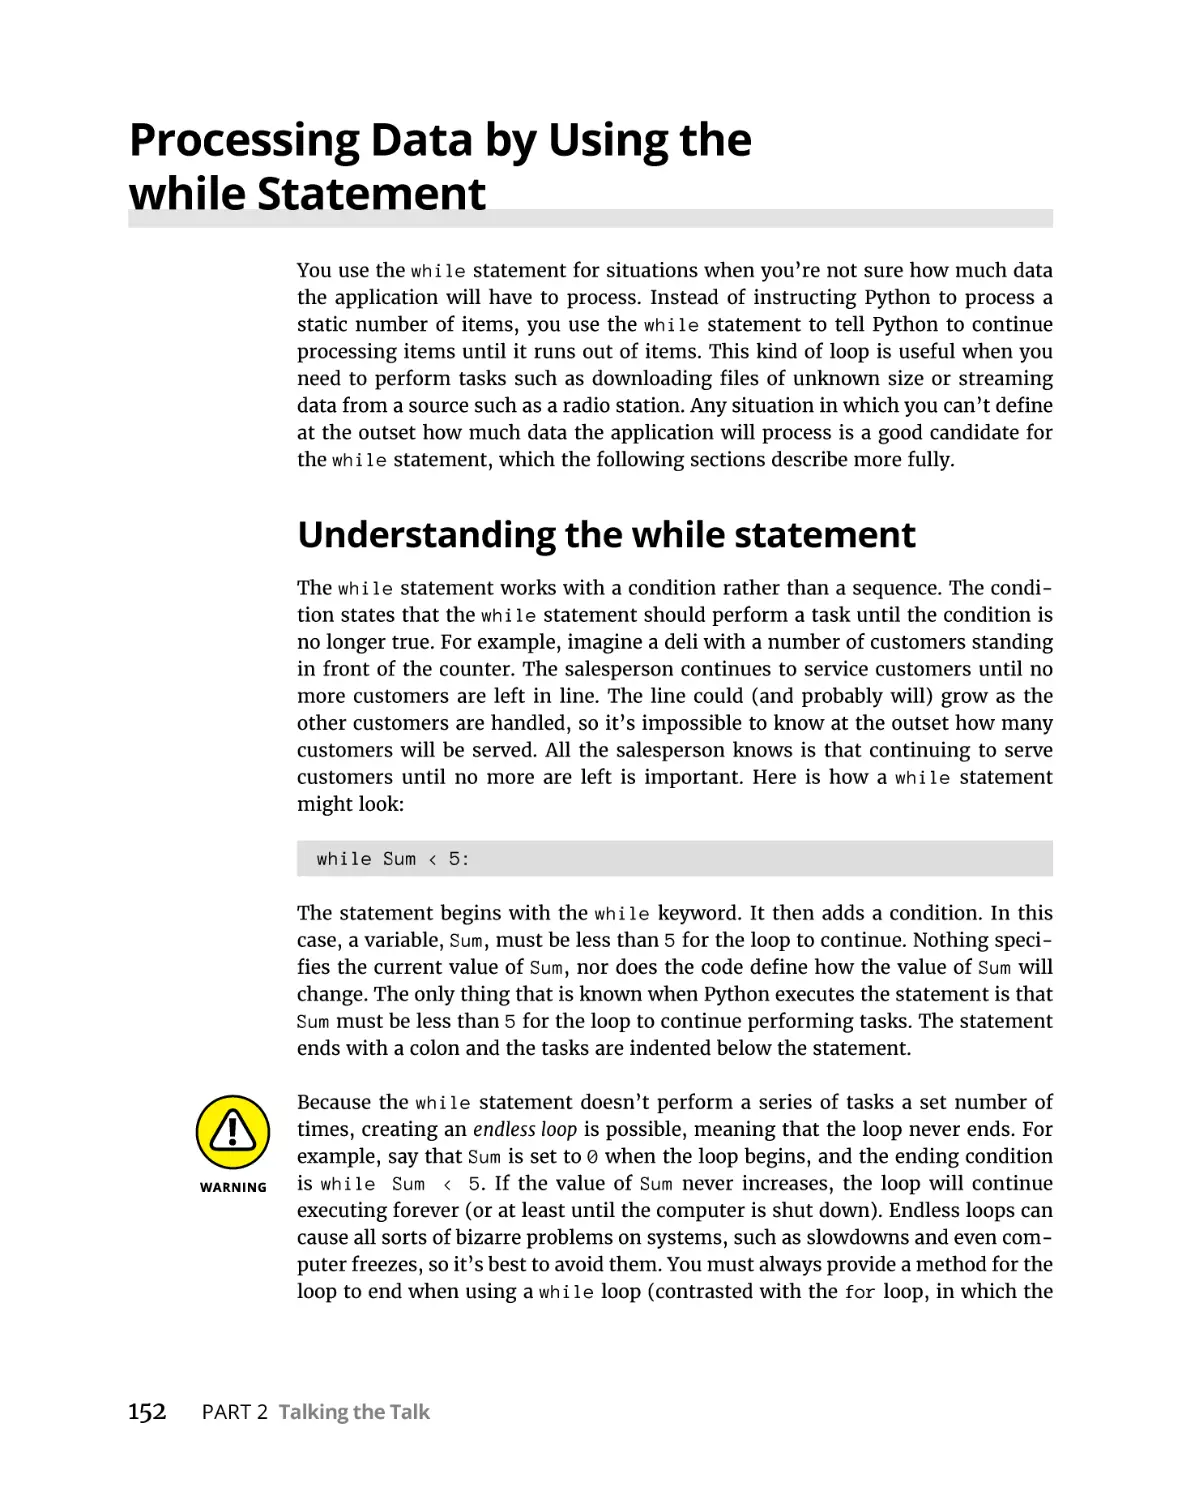 Processing Data by Using the while Statement
Understanding the while statement